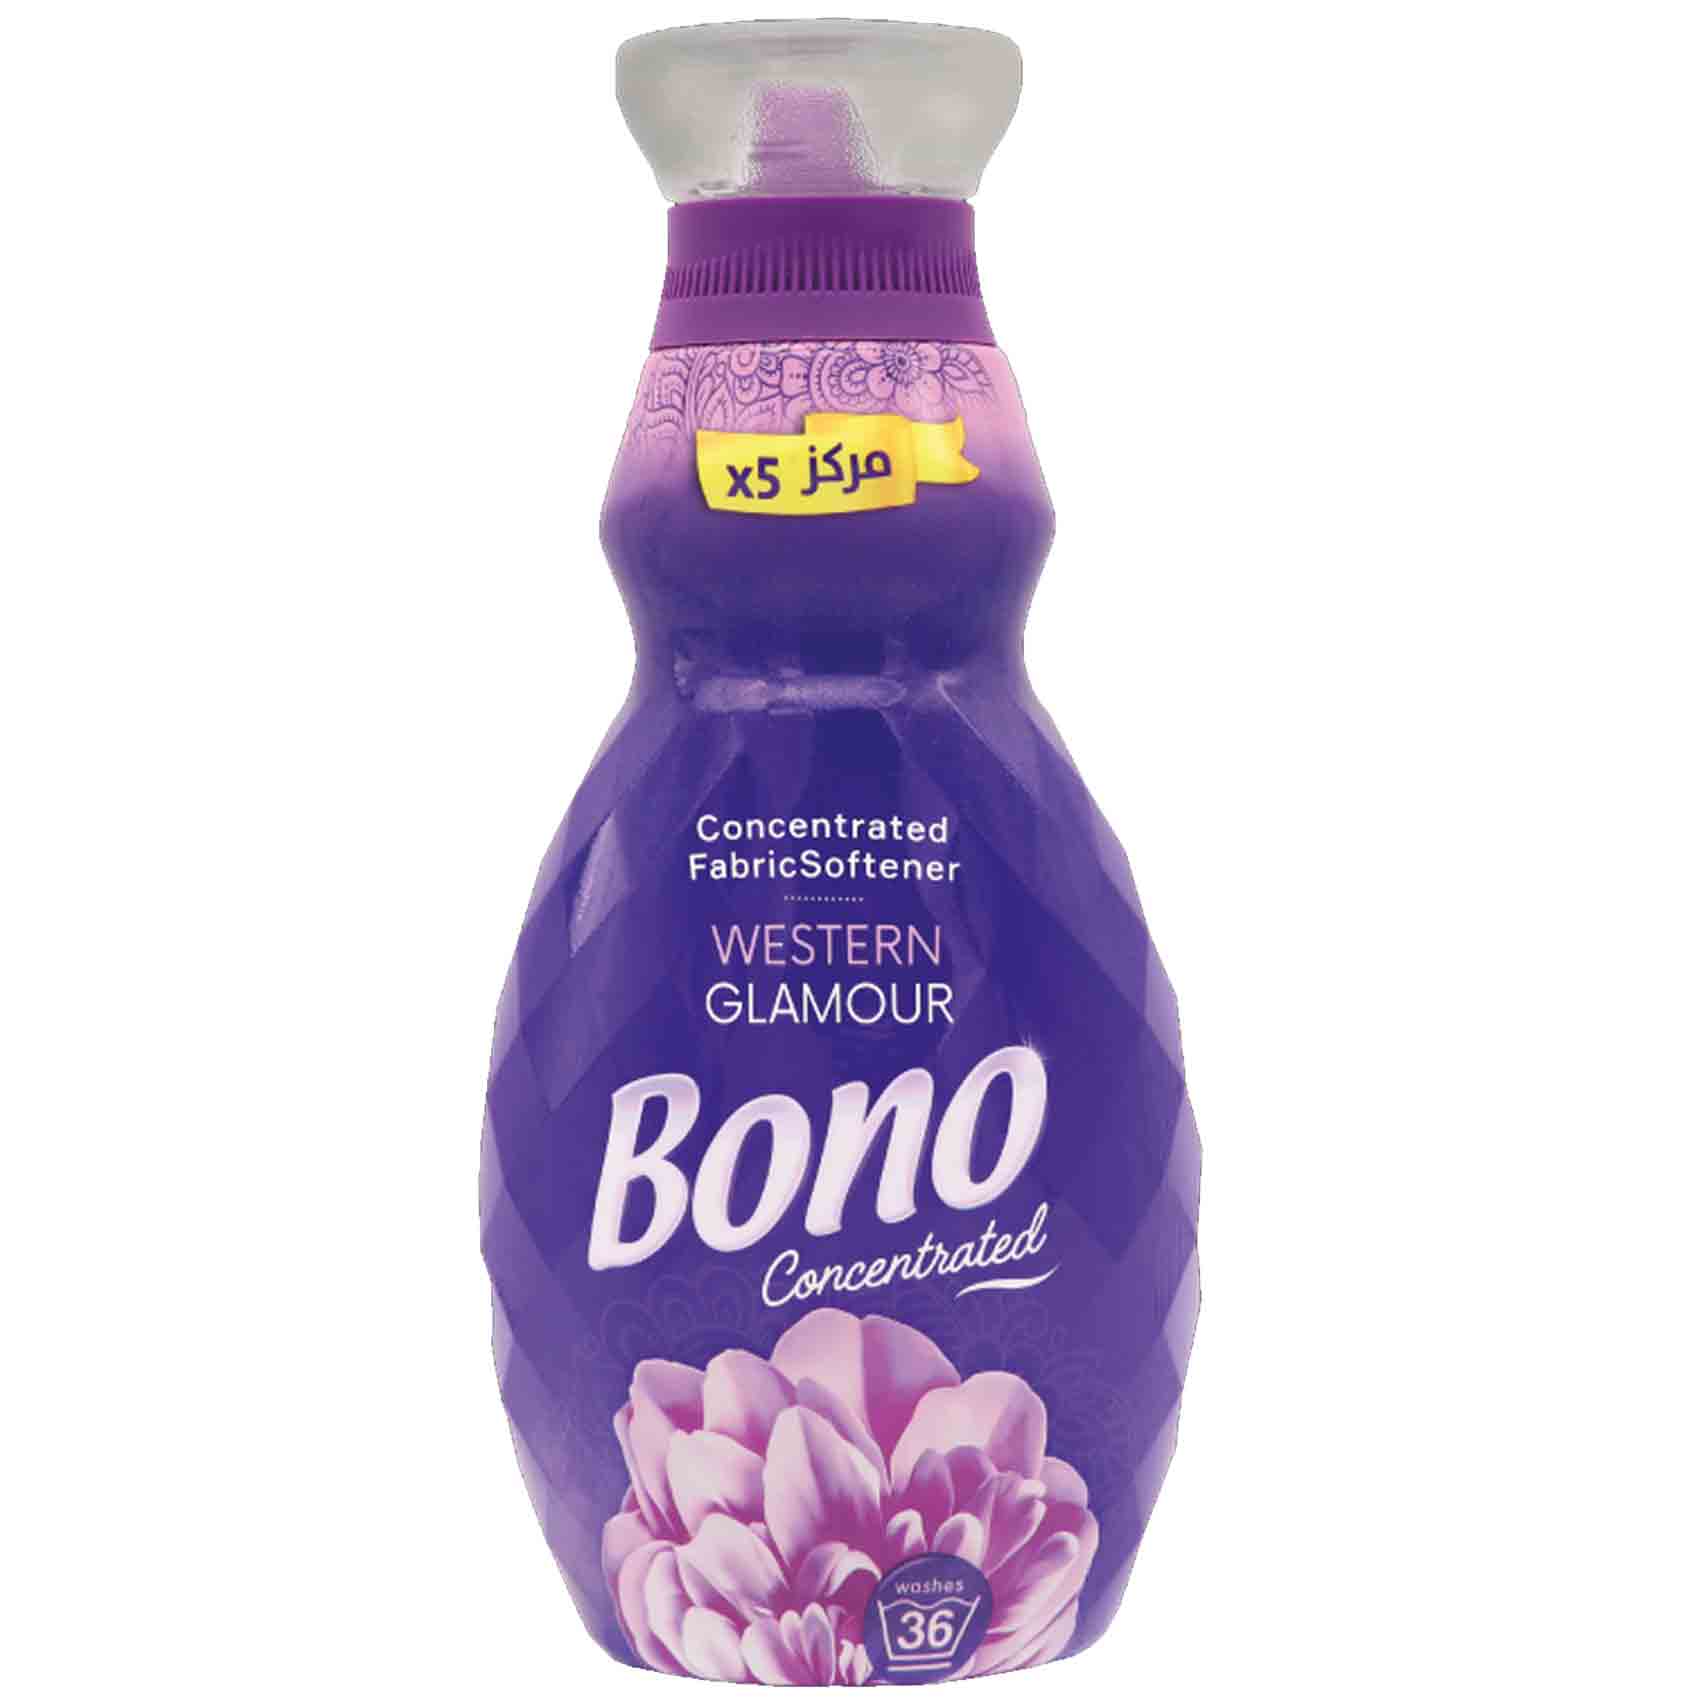 Bono Concentrated Fabric Softener Western Glamour 900 Ml